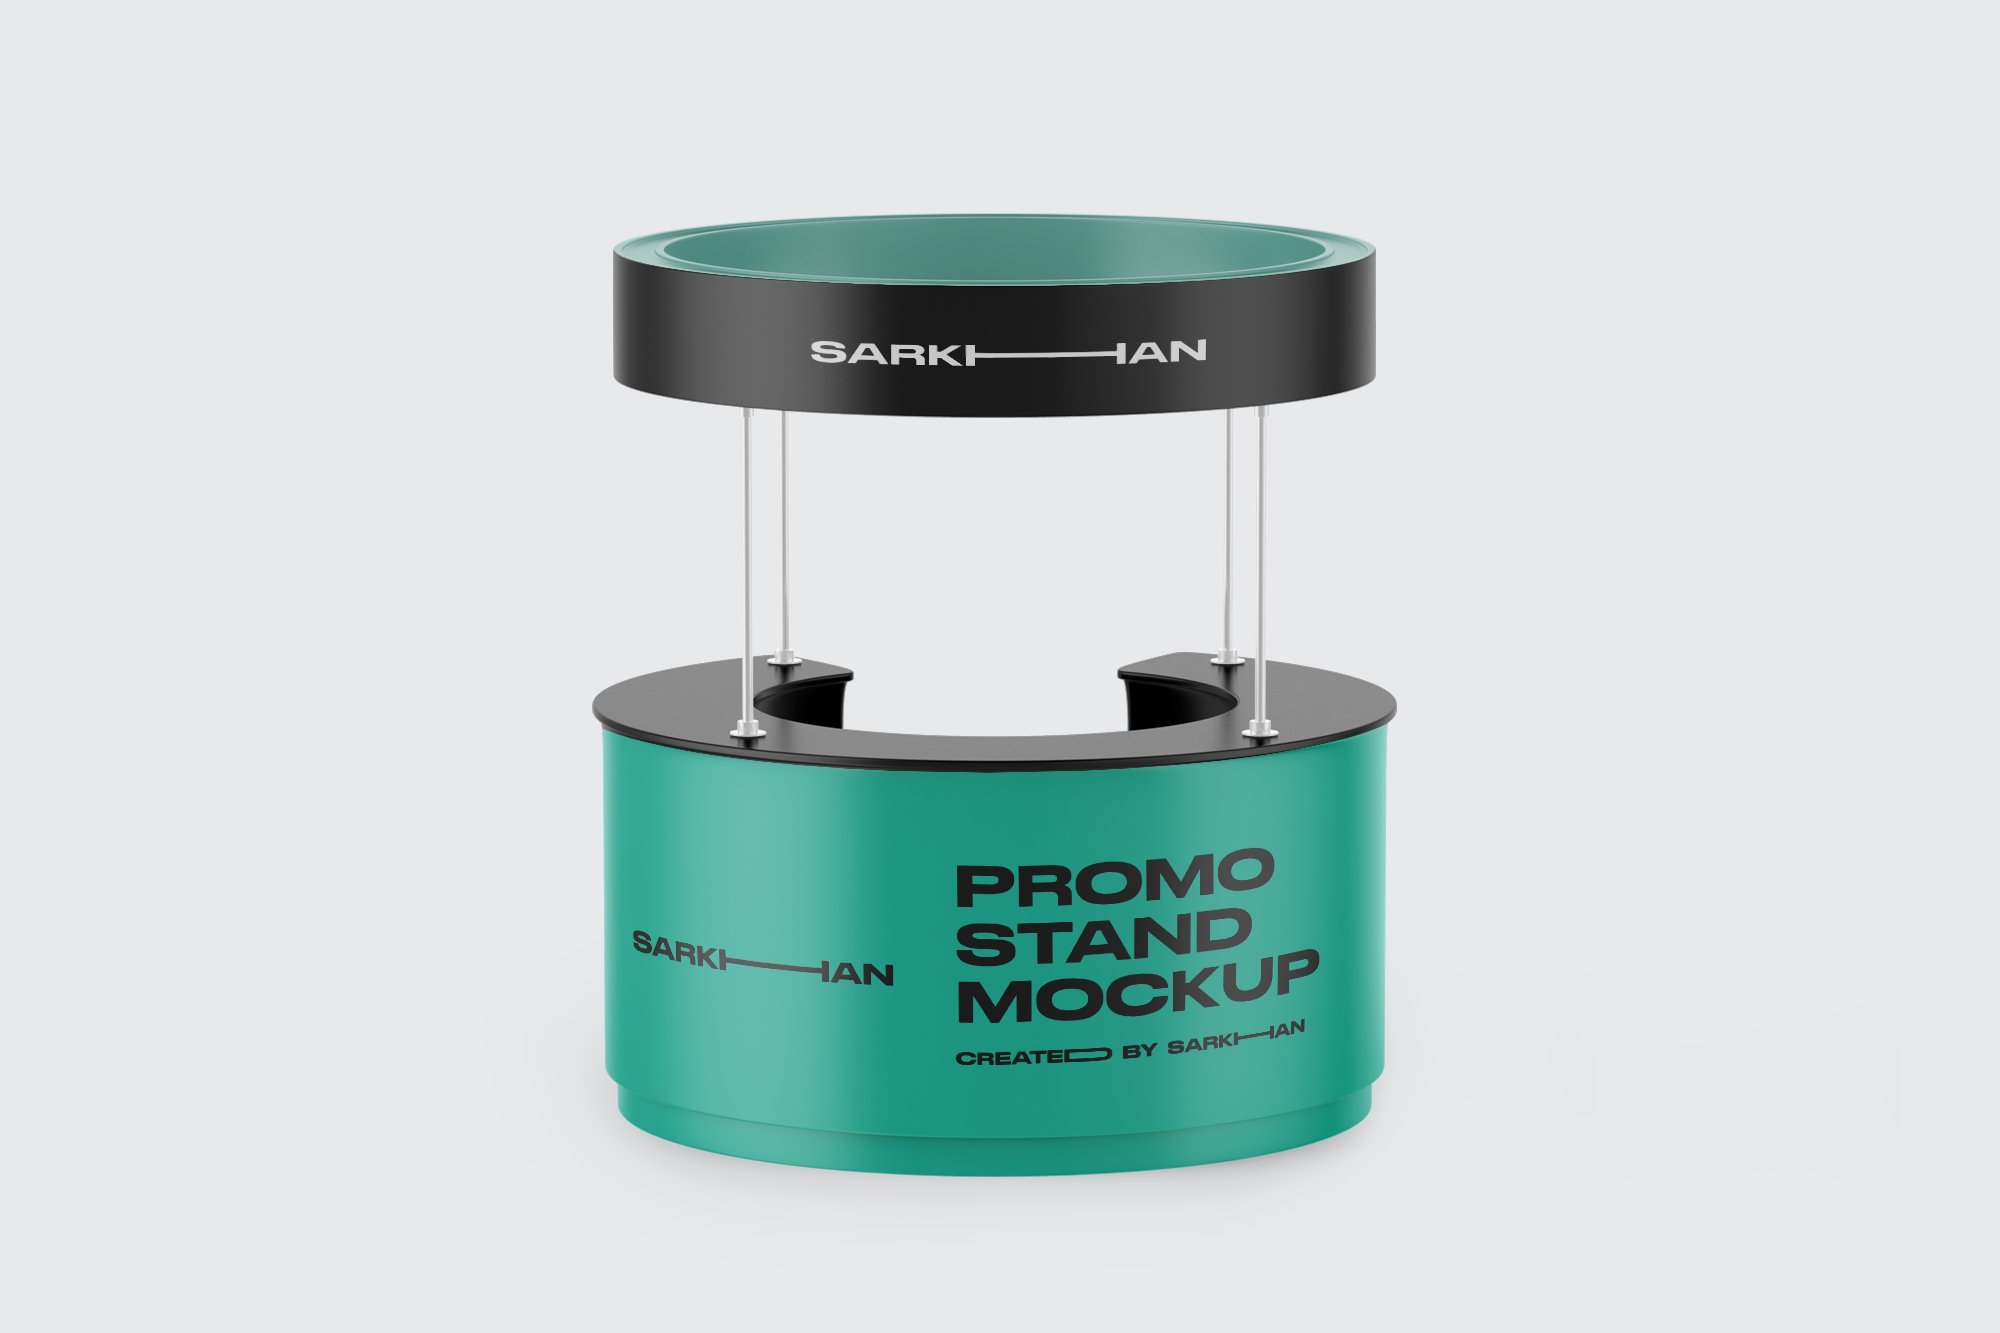 Promo Stand Mockup preview image.